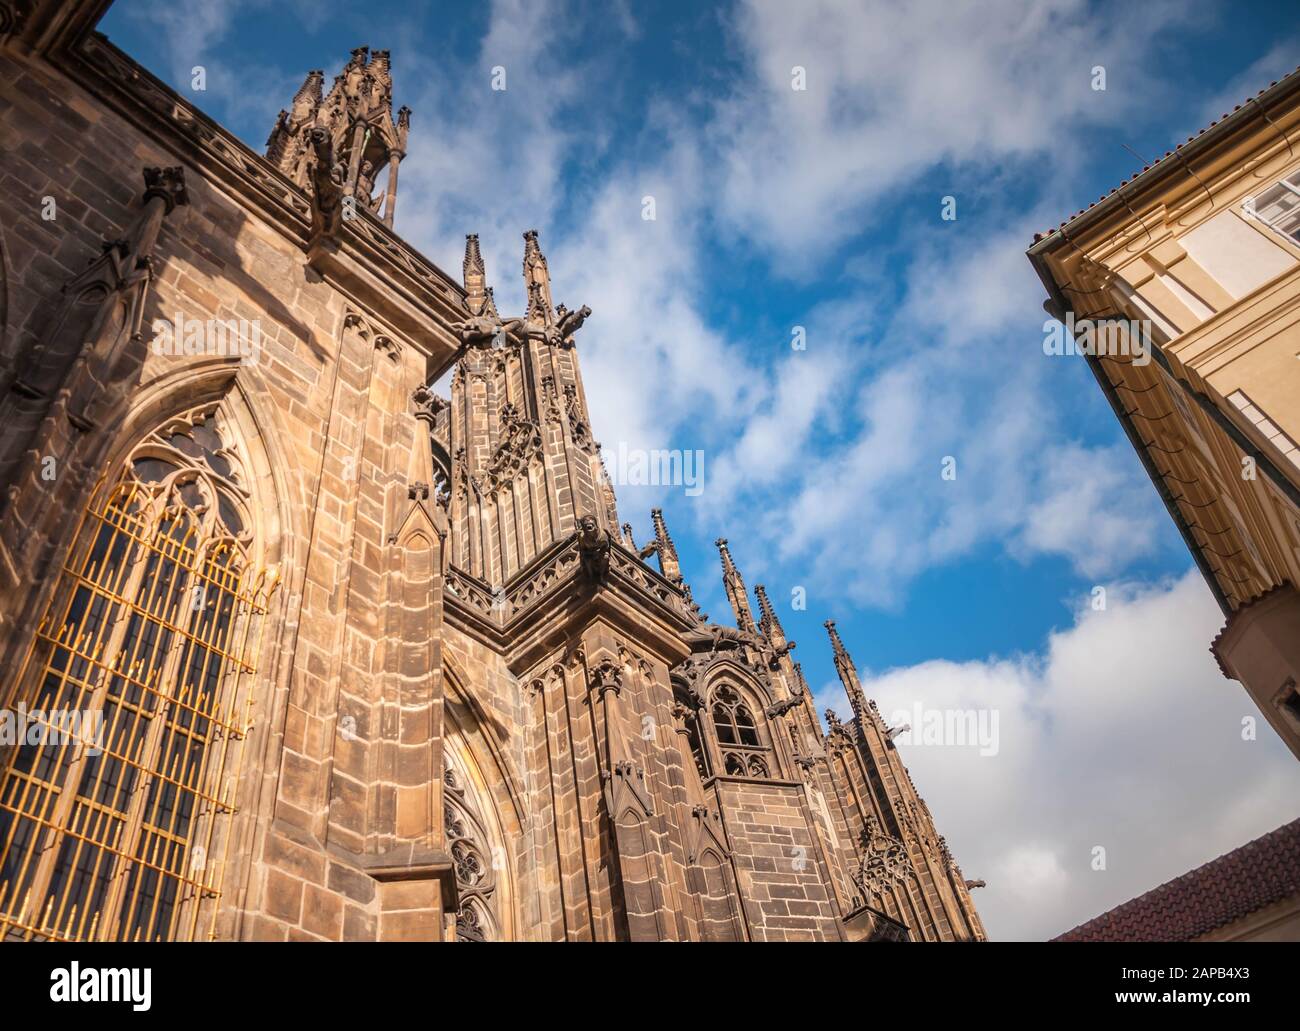 Prague, Czech Republic 1/5/2020: Details of the St. Vitus Cathedral. Stock Photo